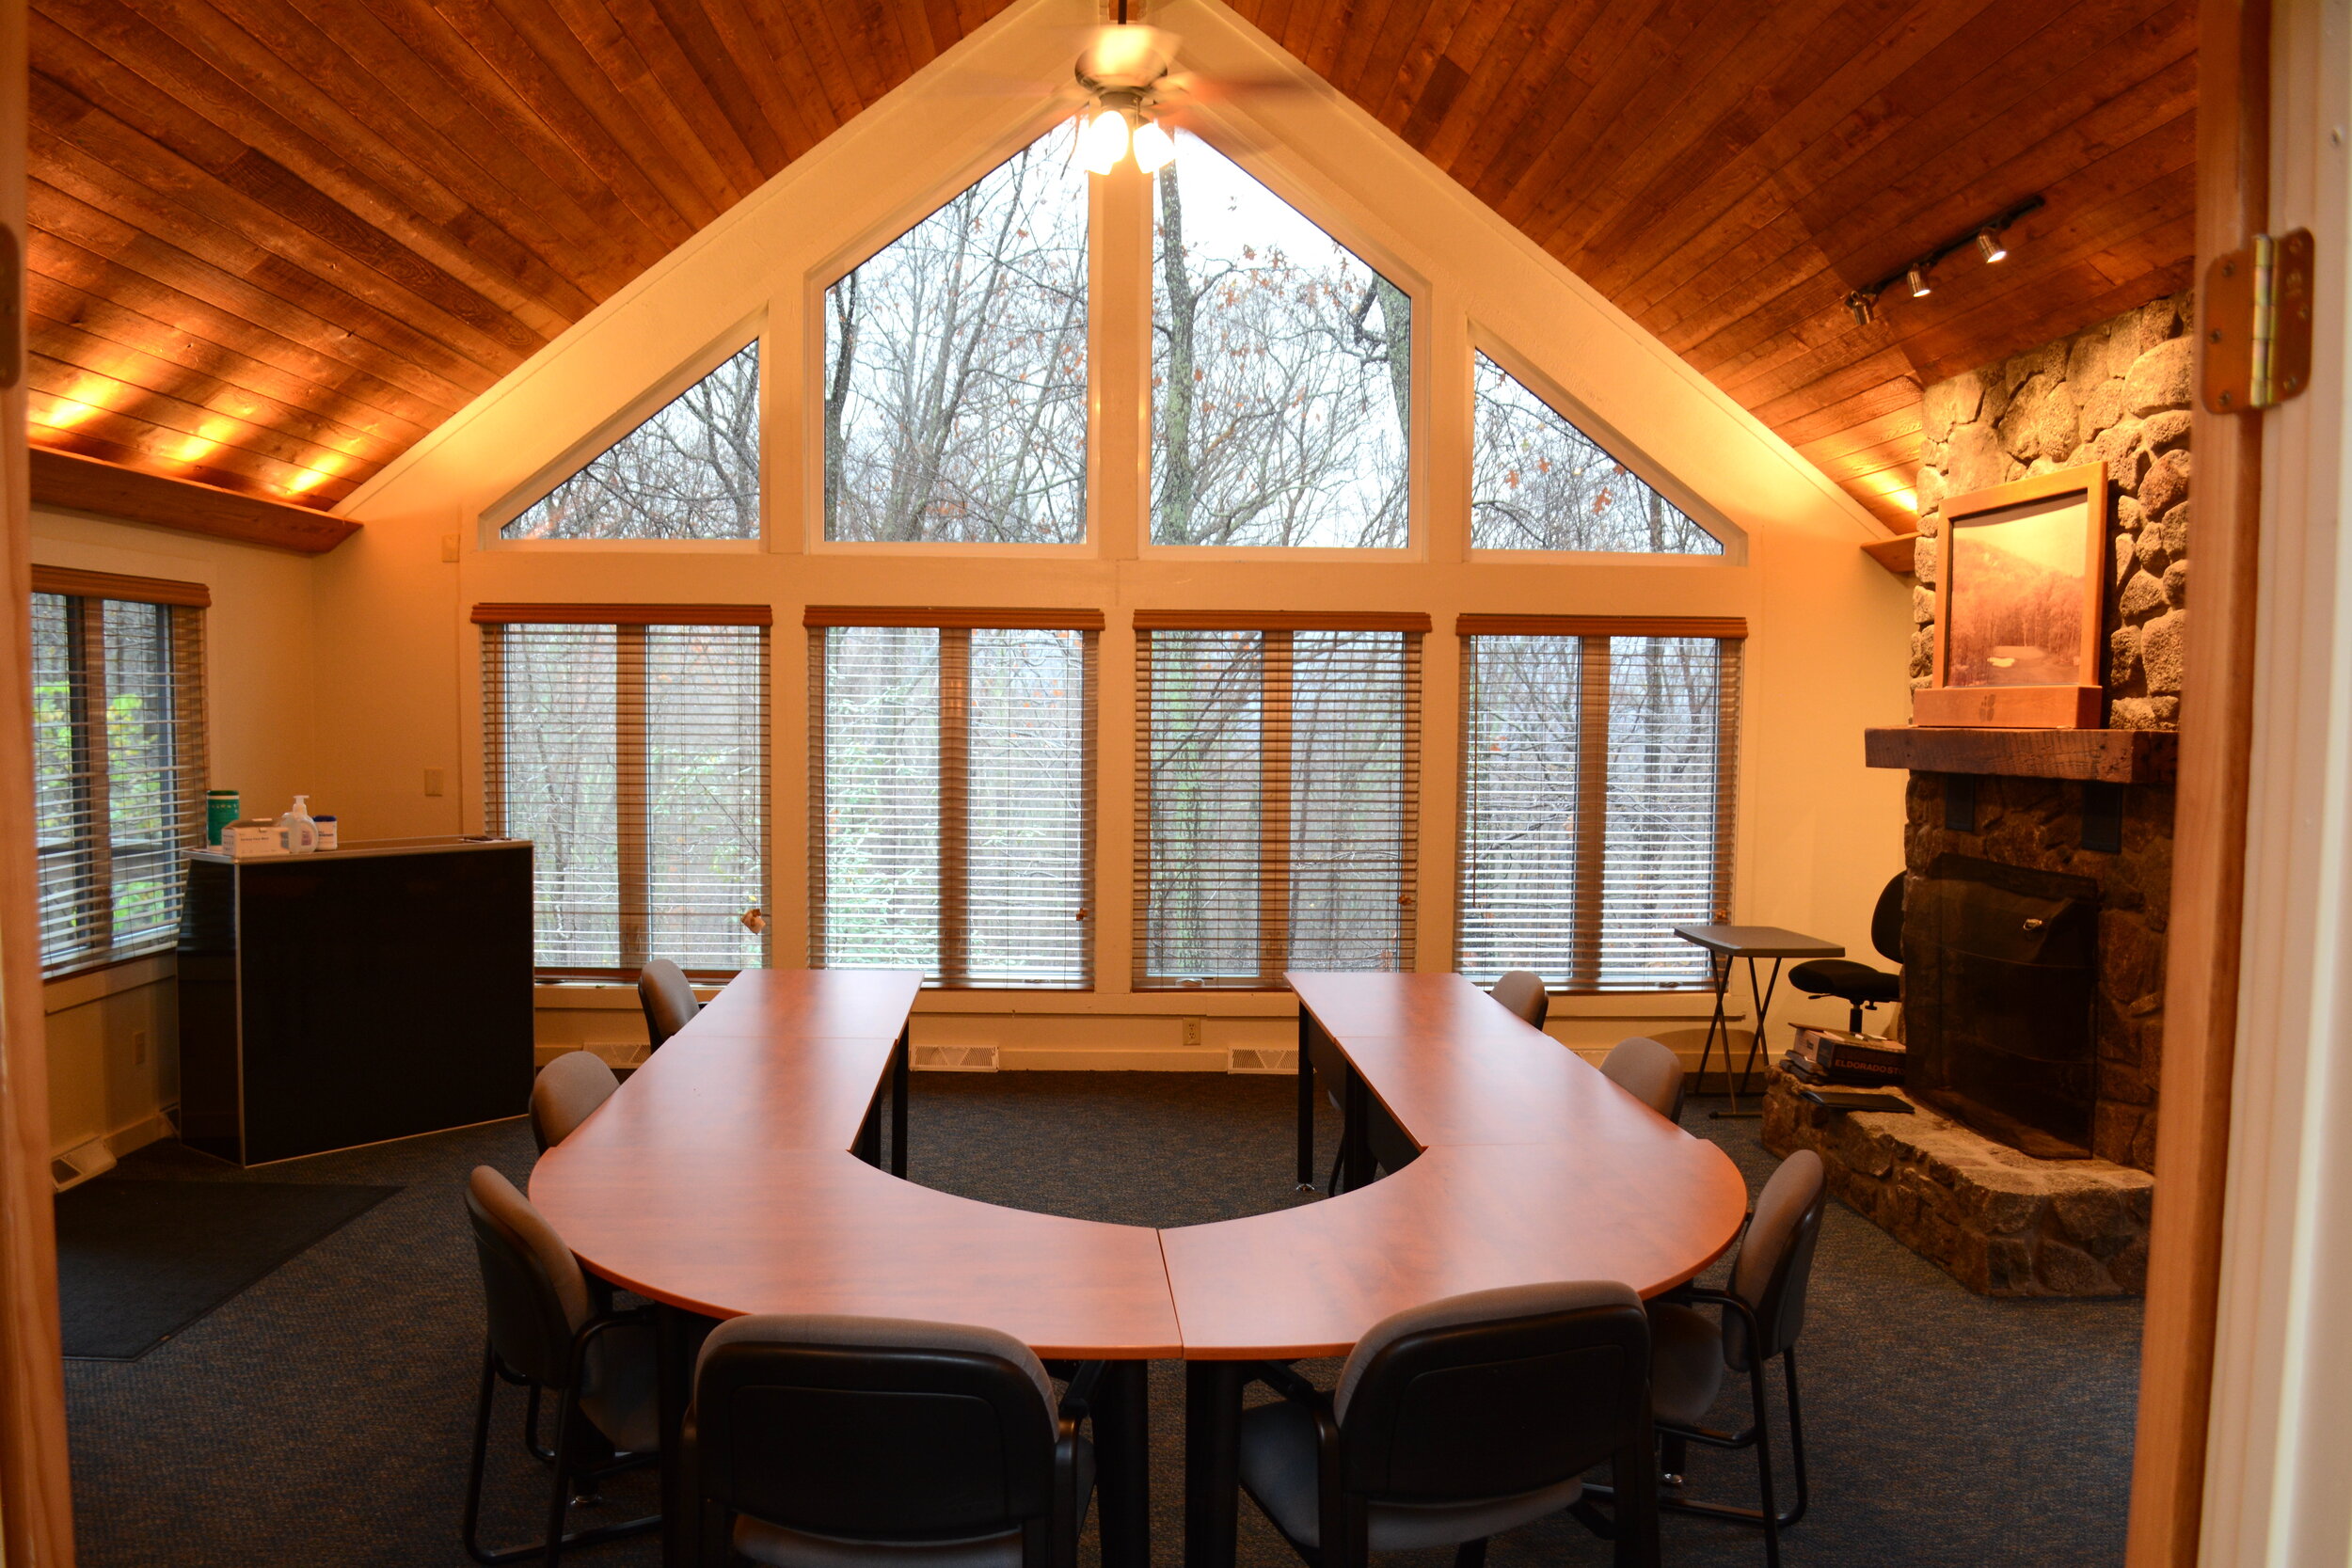   The meeting space can handle a meeting for 12 people easily. This view is from the kitchen.  